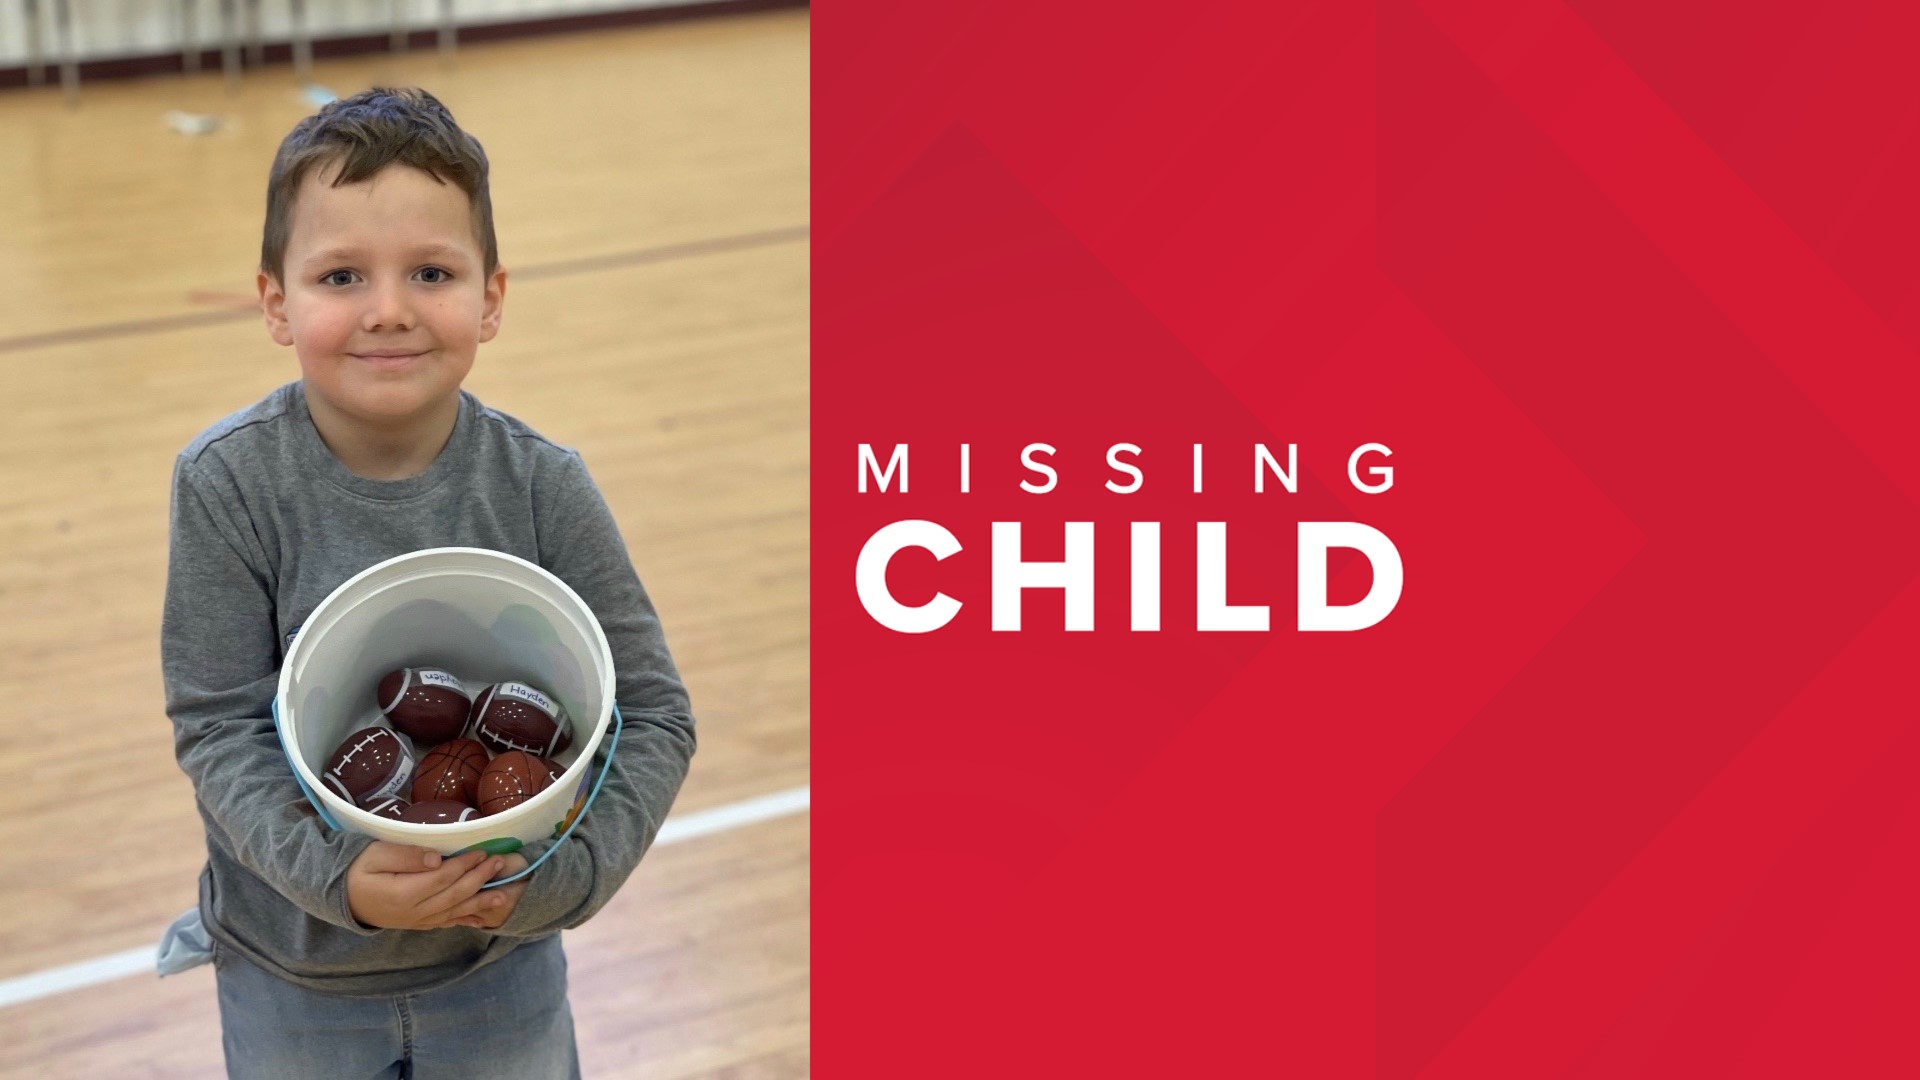 The child went missing from a residence located in the 22300 block of County Road 251.